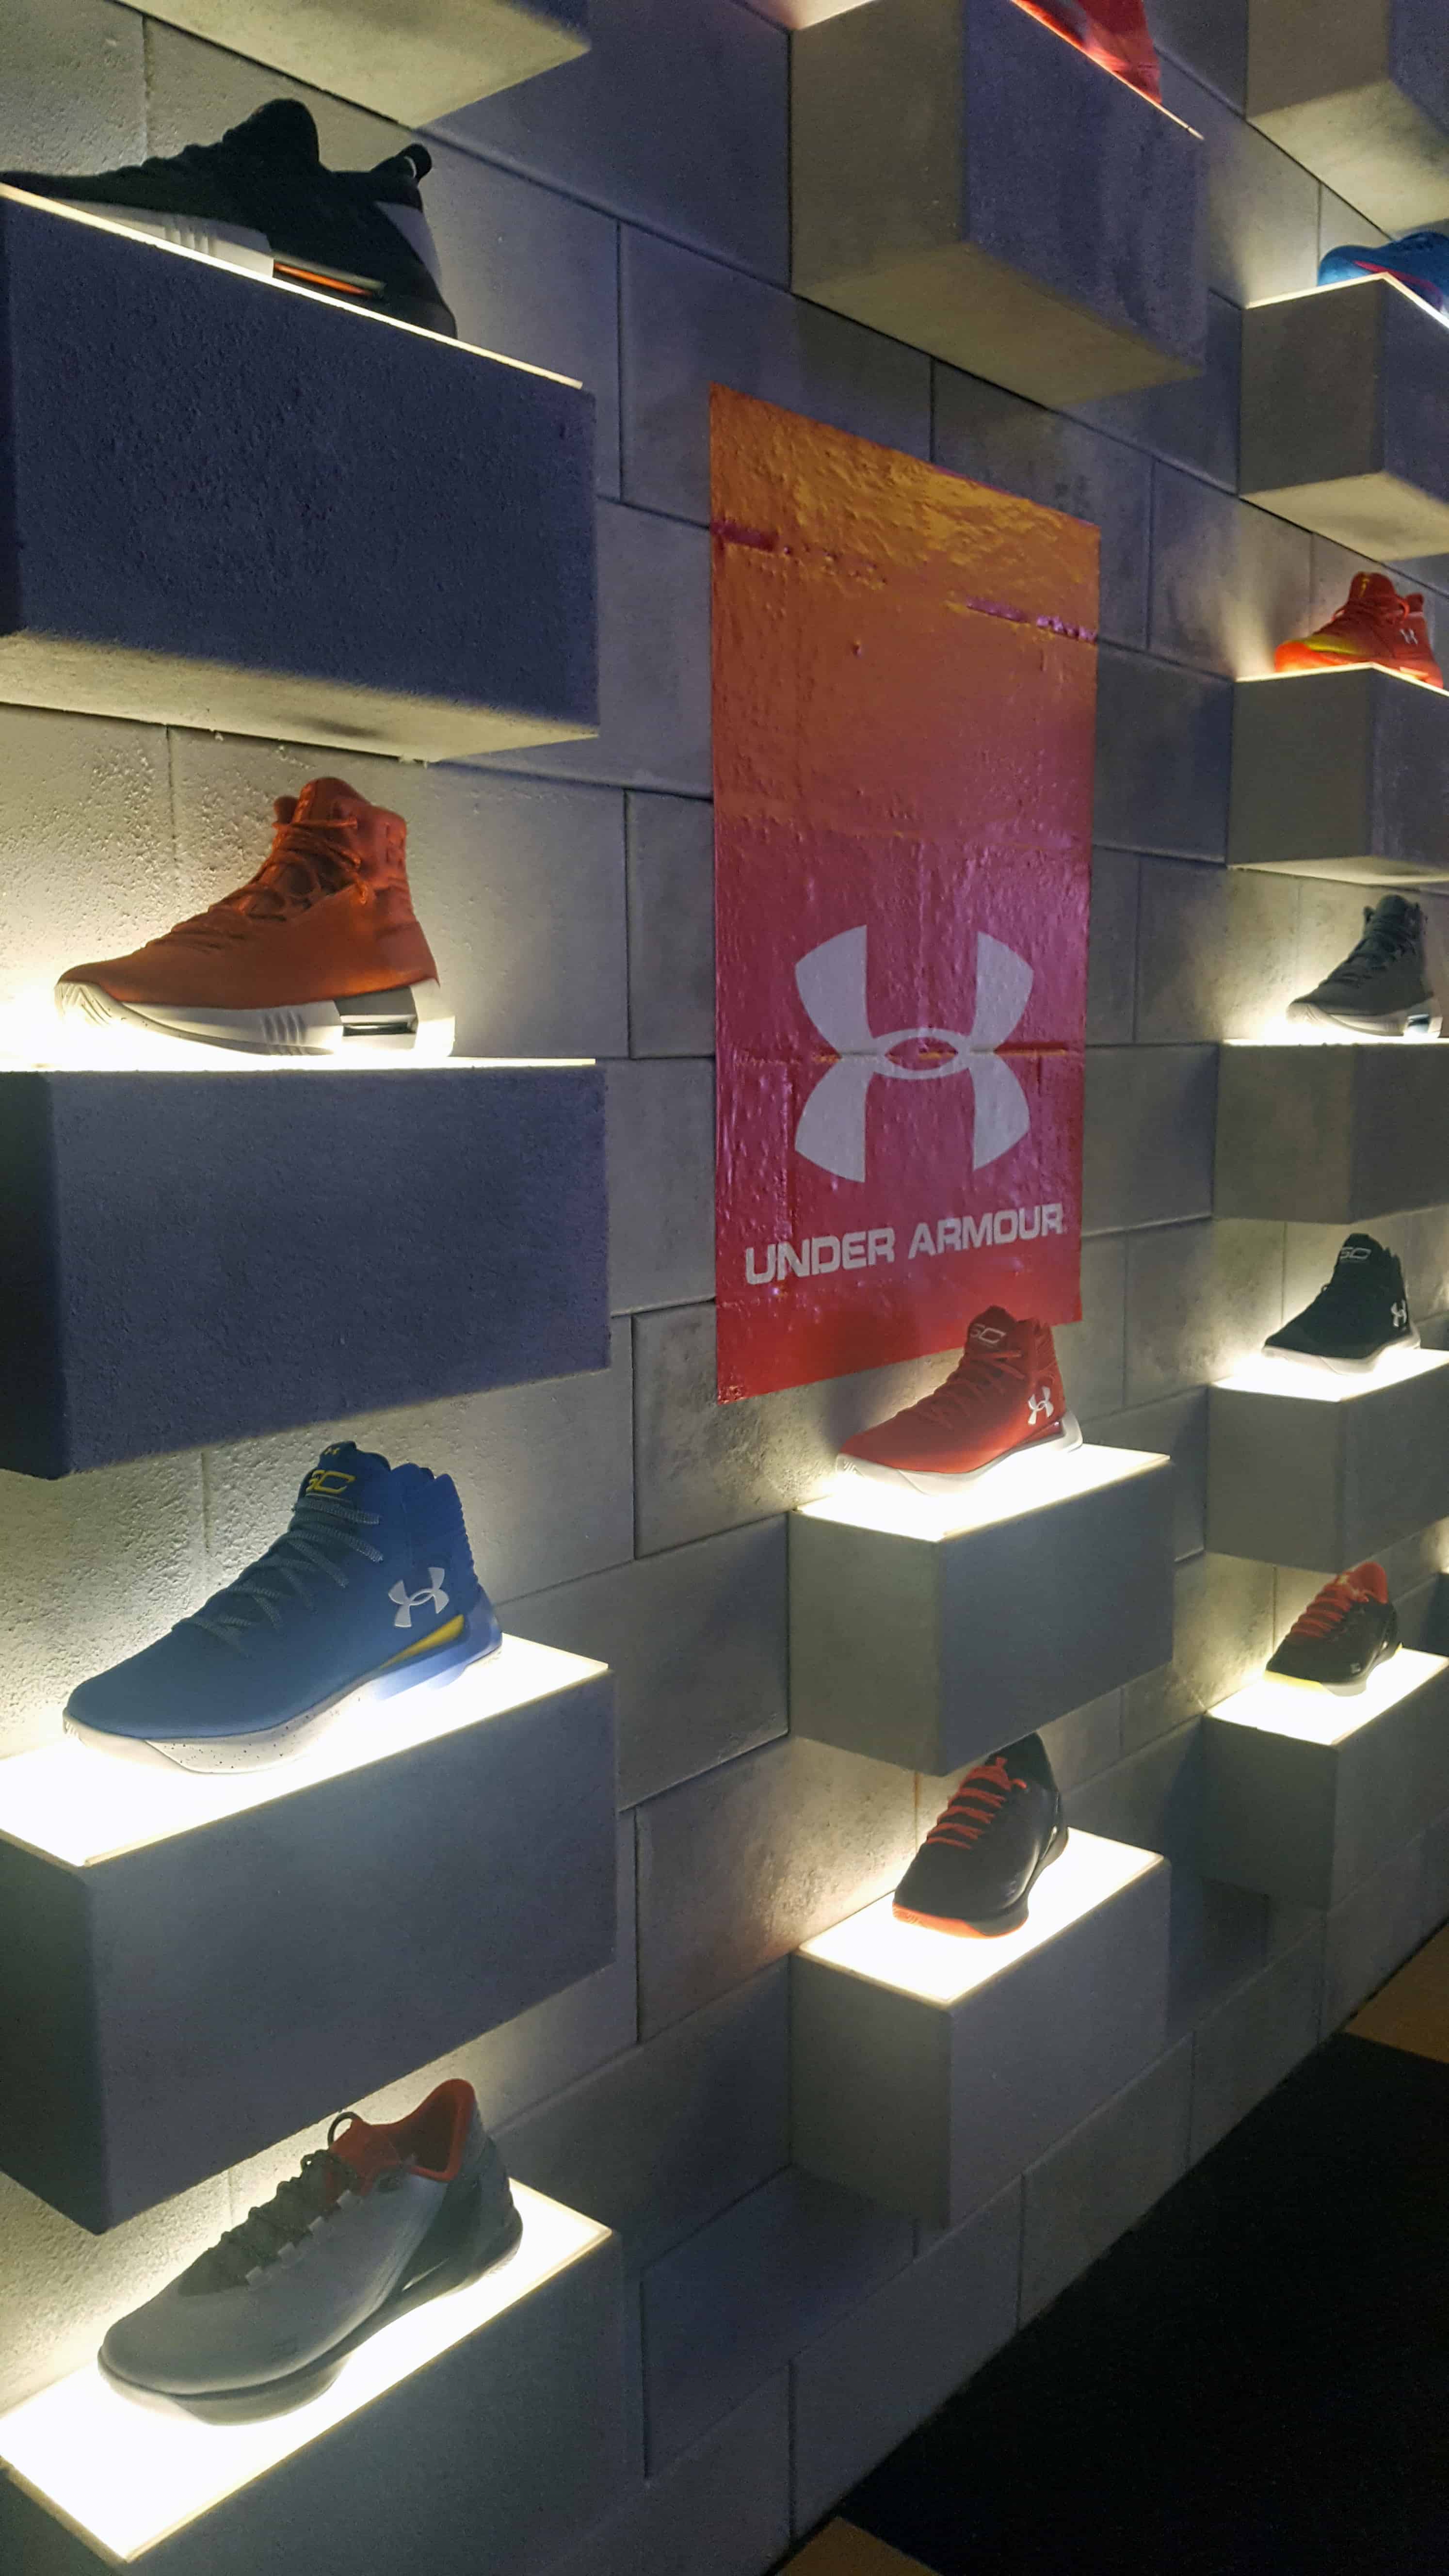 Under Armour sneakers displayed on wall